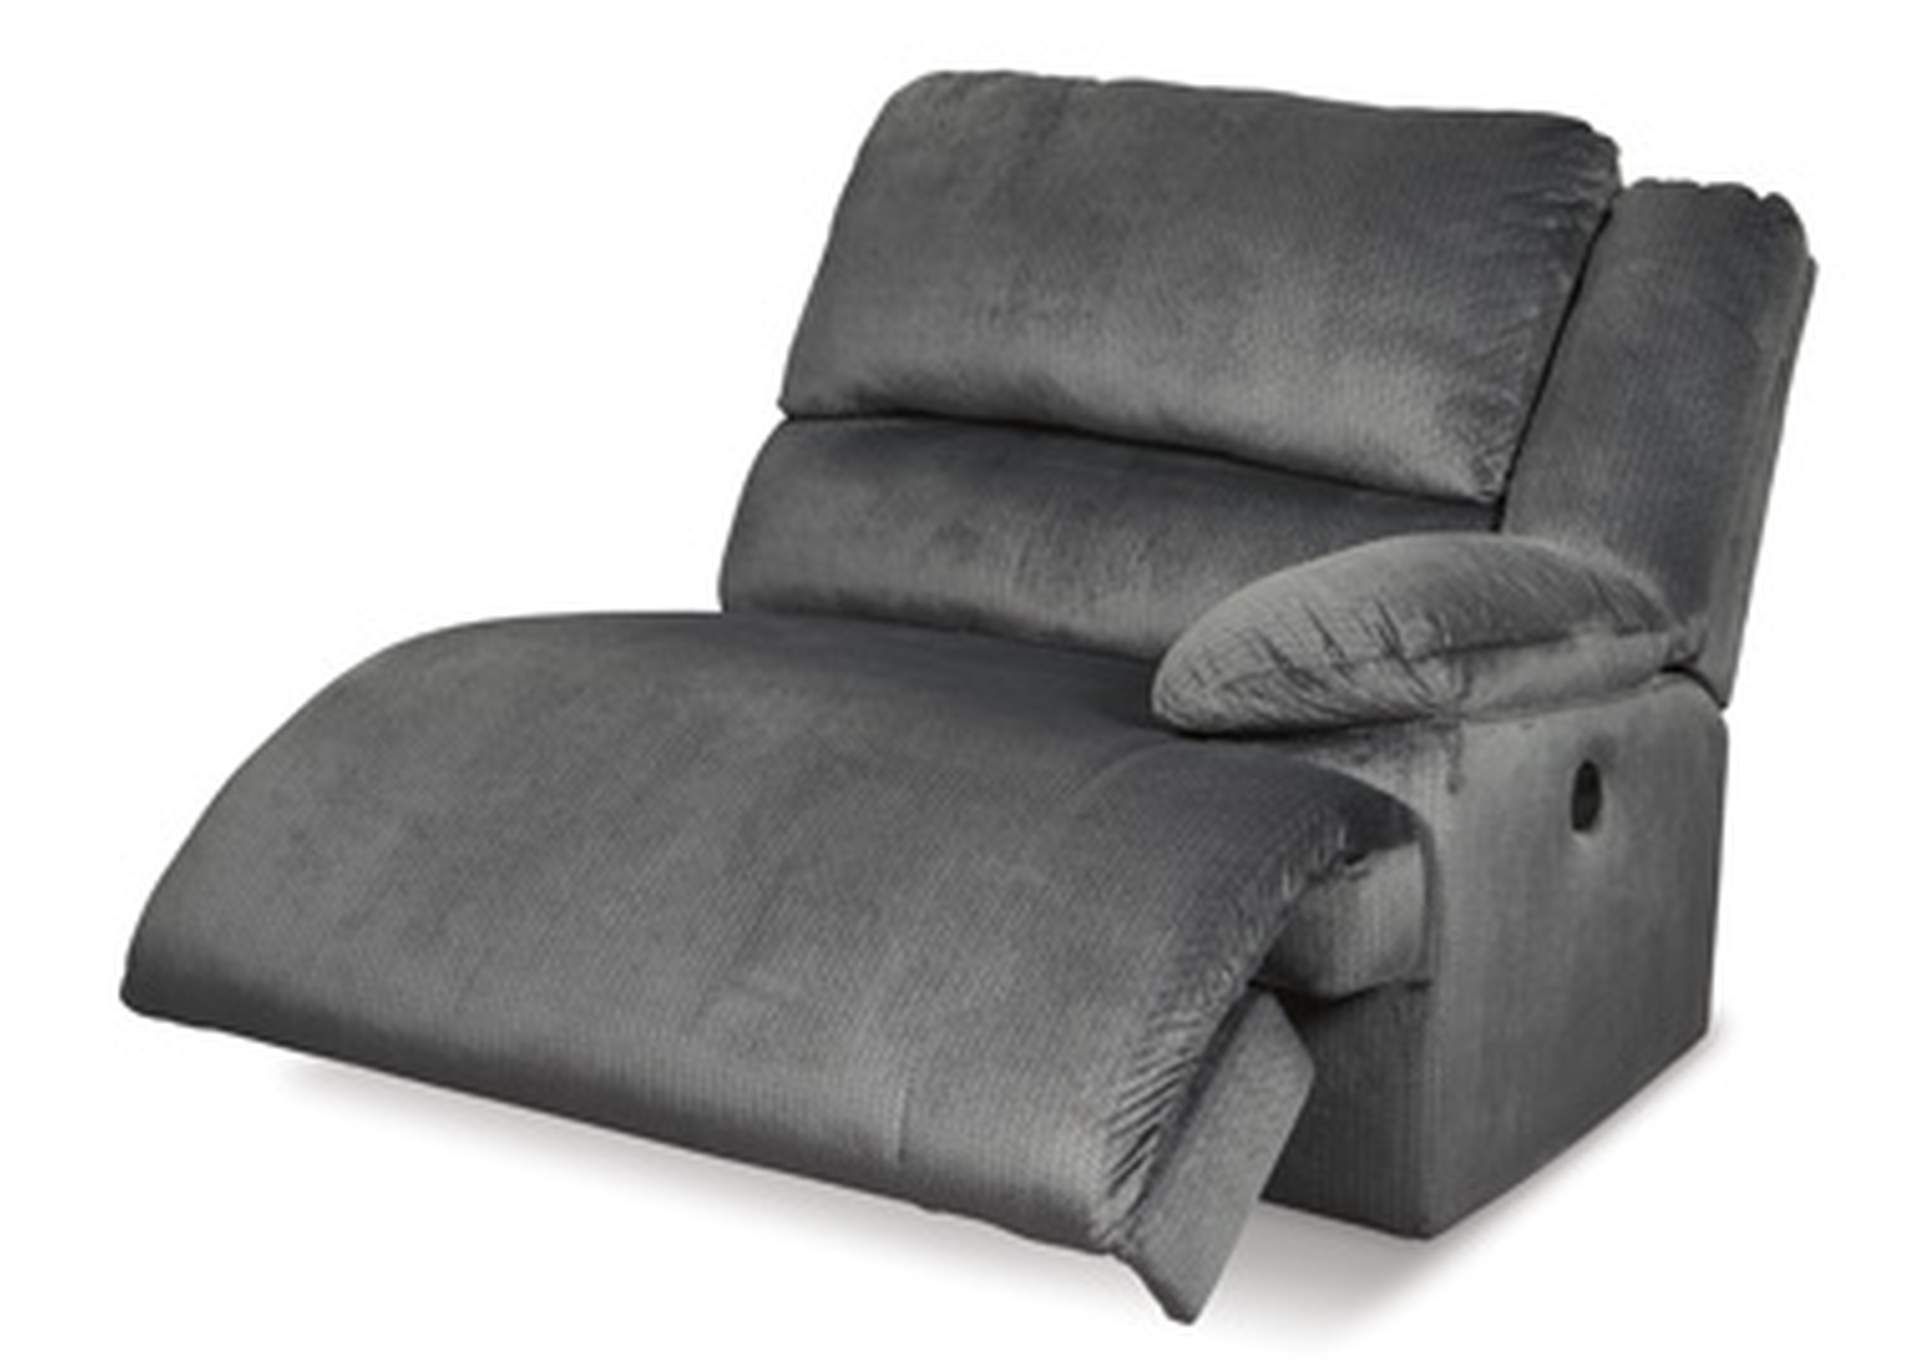 Clonmel Right-Arm Facing Power Recliner,Signature Design By Ashley